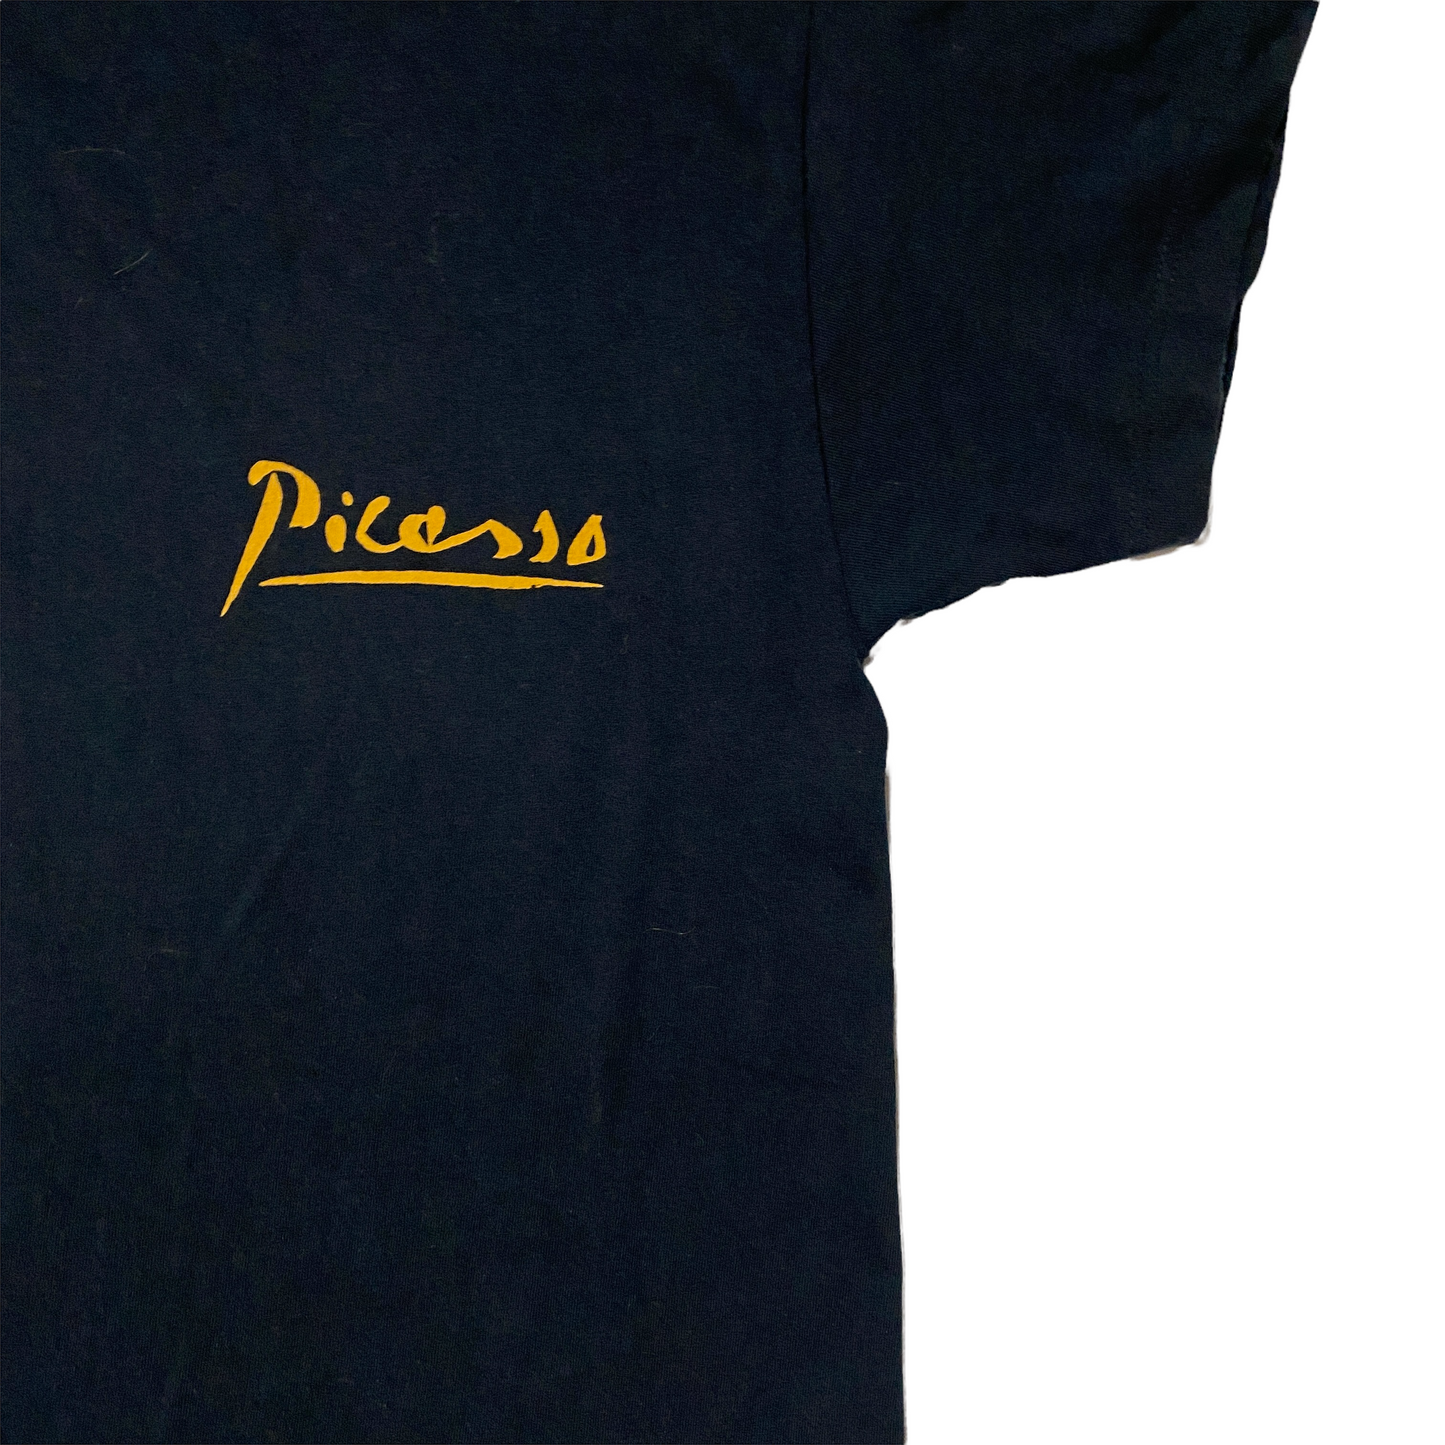 1995 Picasso Vintage Tee (M)